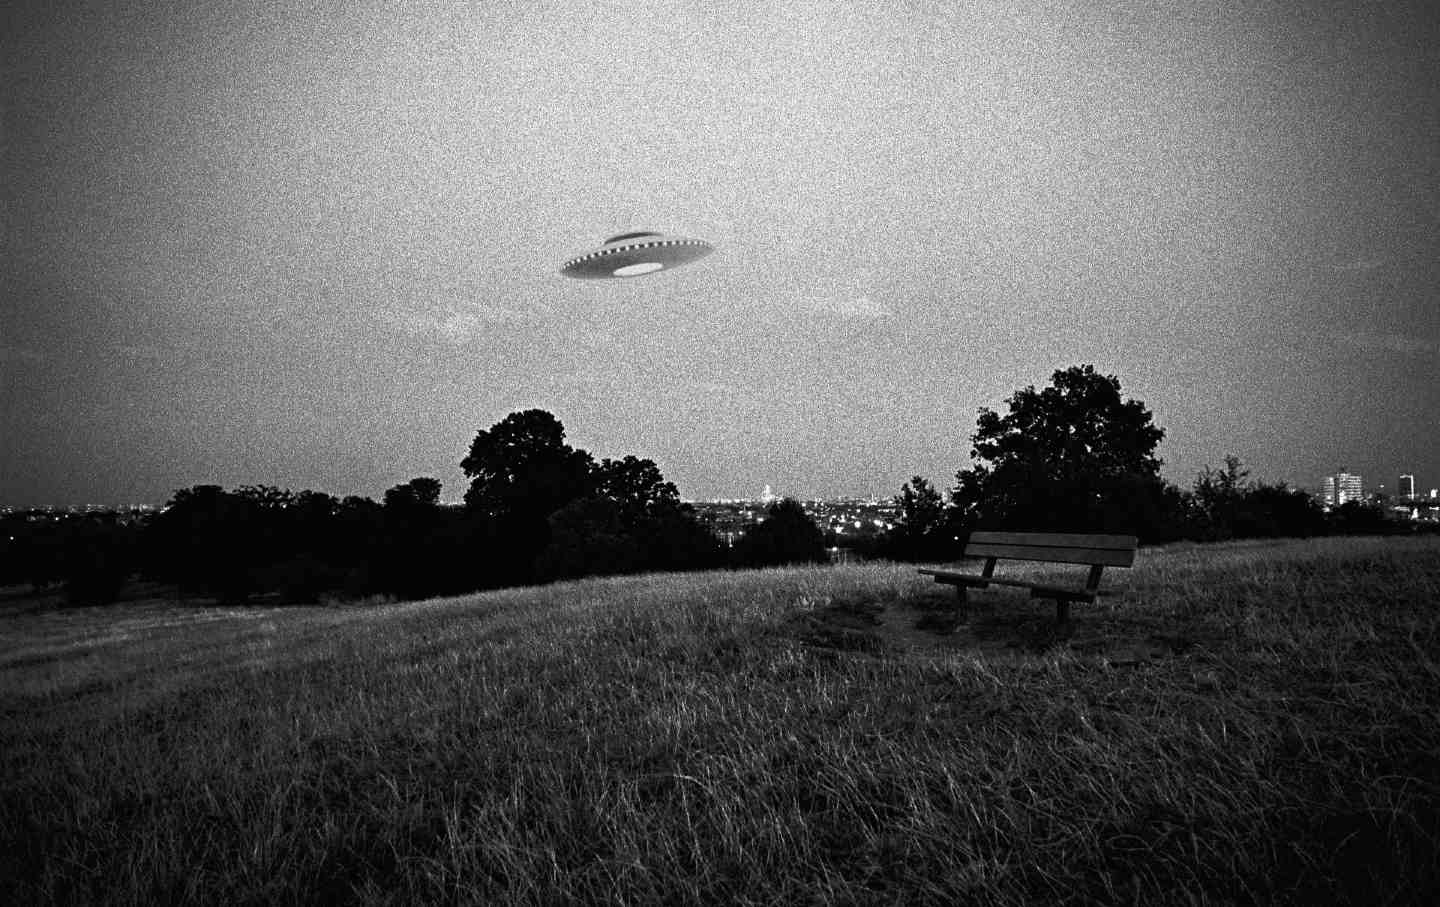 A digital composite of a UFO flying above an urban park.